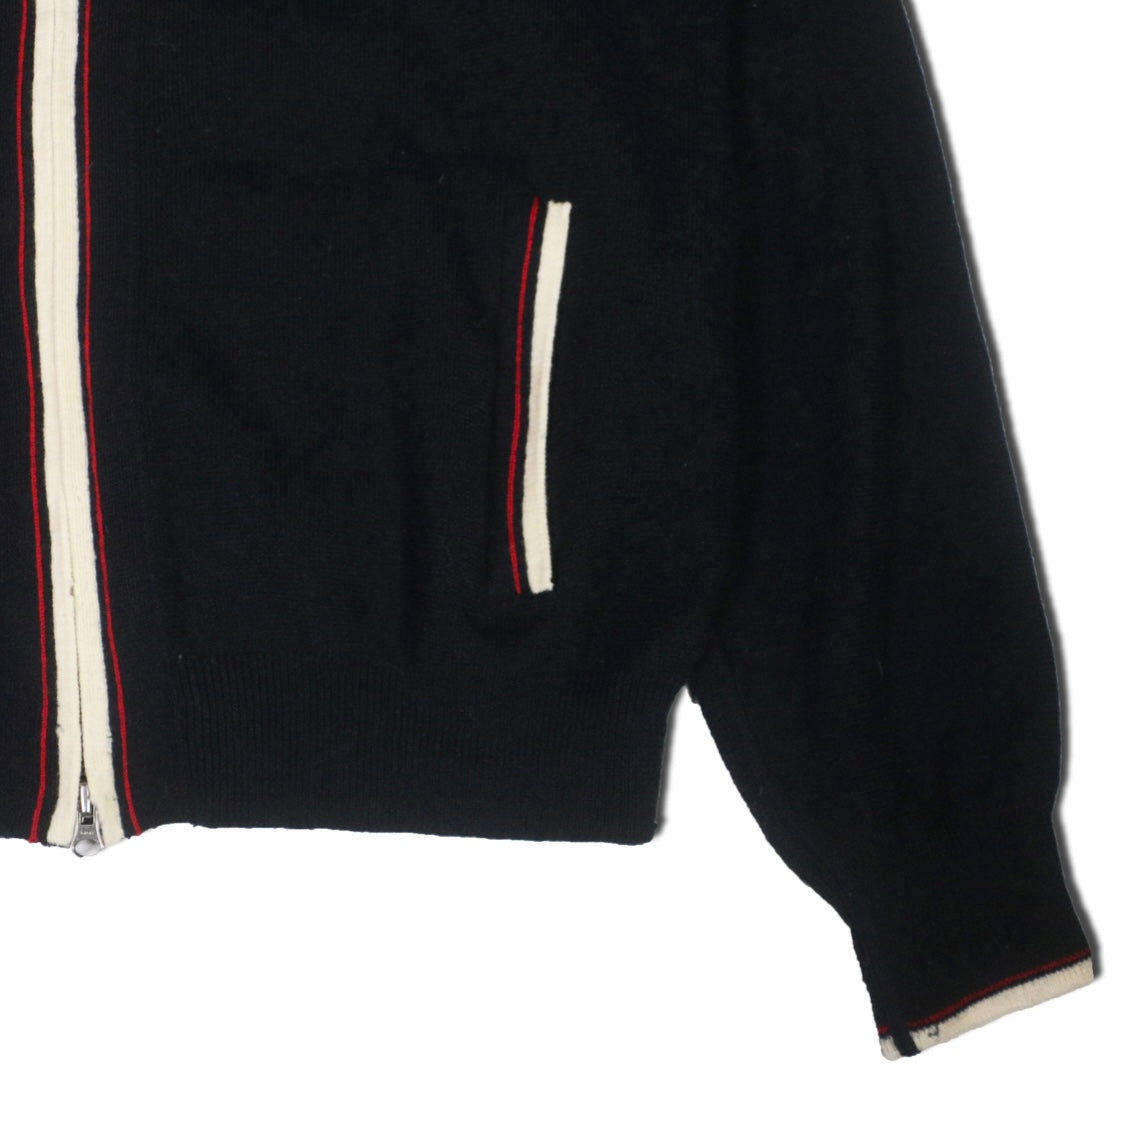 "USED" TOMMY HILFIGER ZIP UP KNIT / NAVY